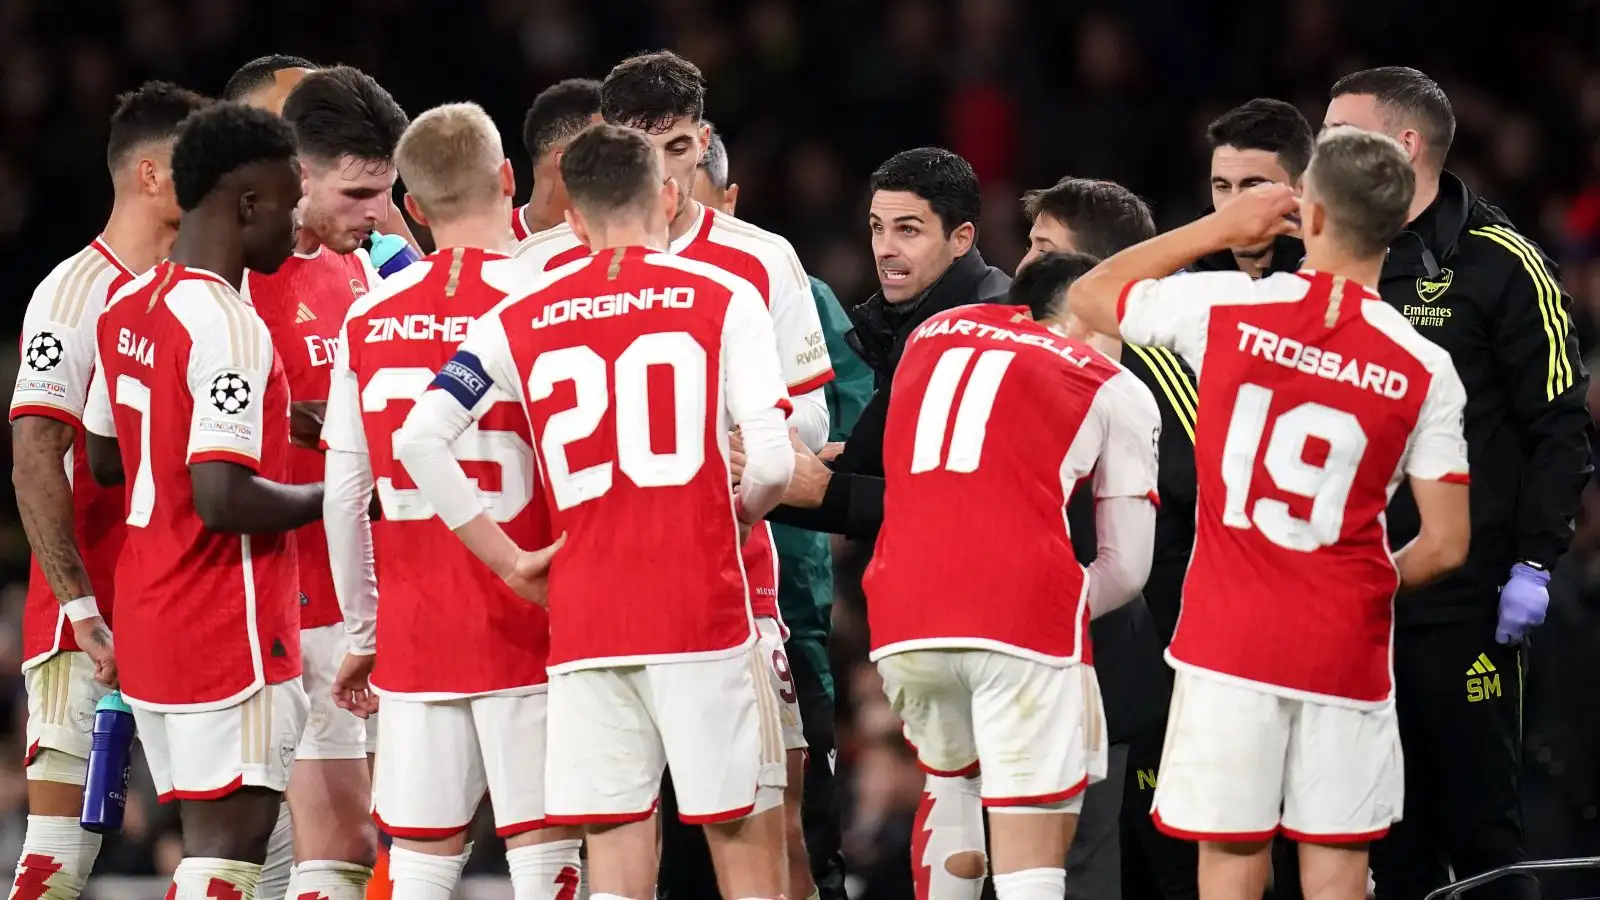 Medley manager Mikel Arteta confers his gamers a group talk during a match.